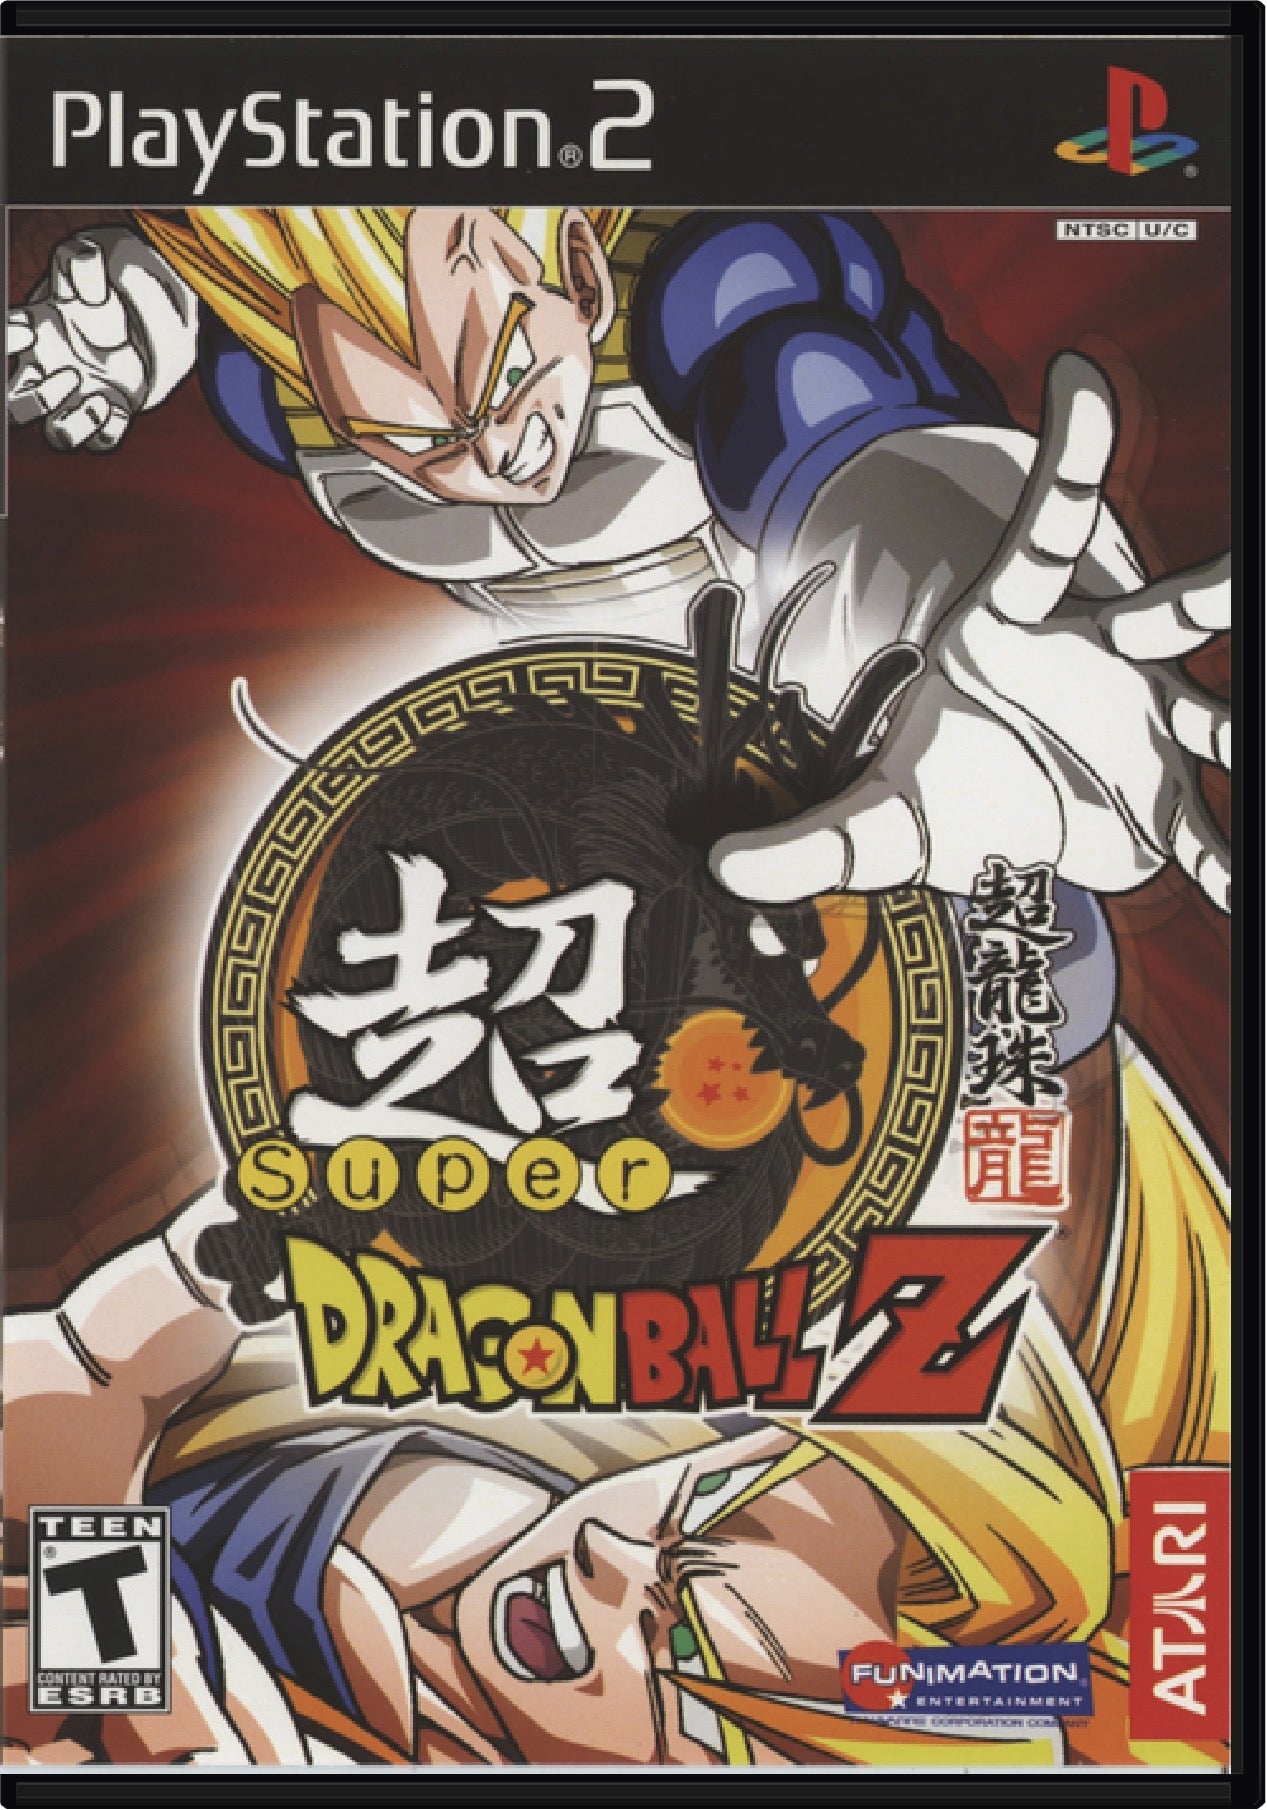 Super Dragon Ball Z Cover Art and Product Photo